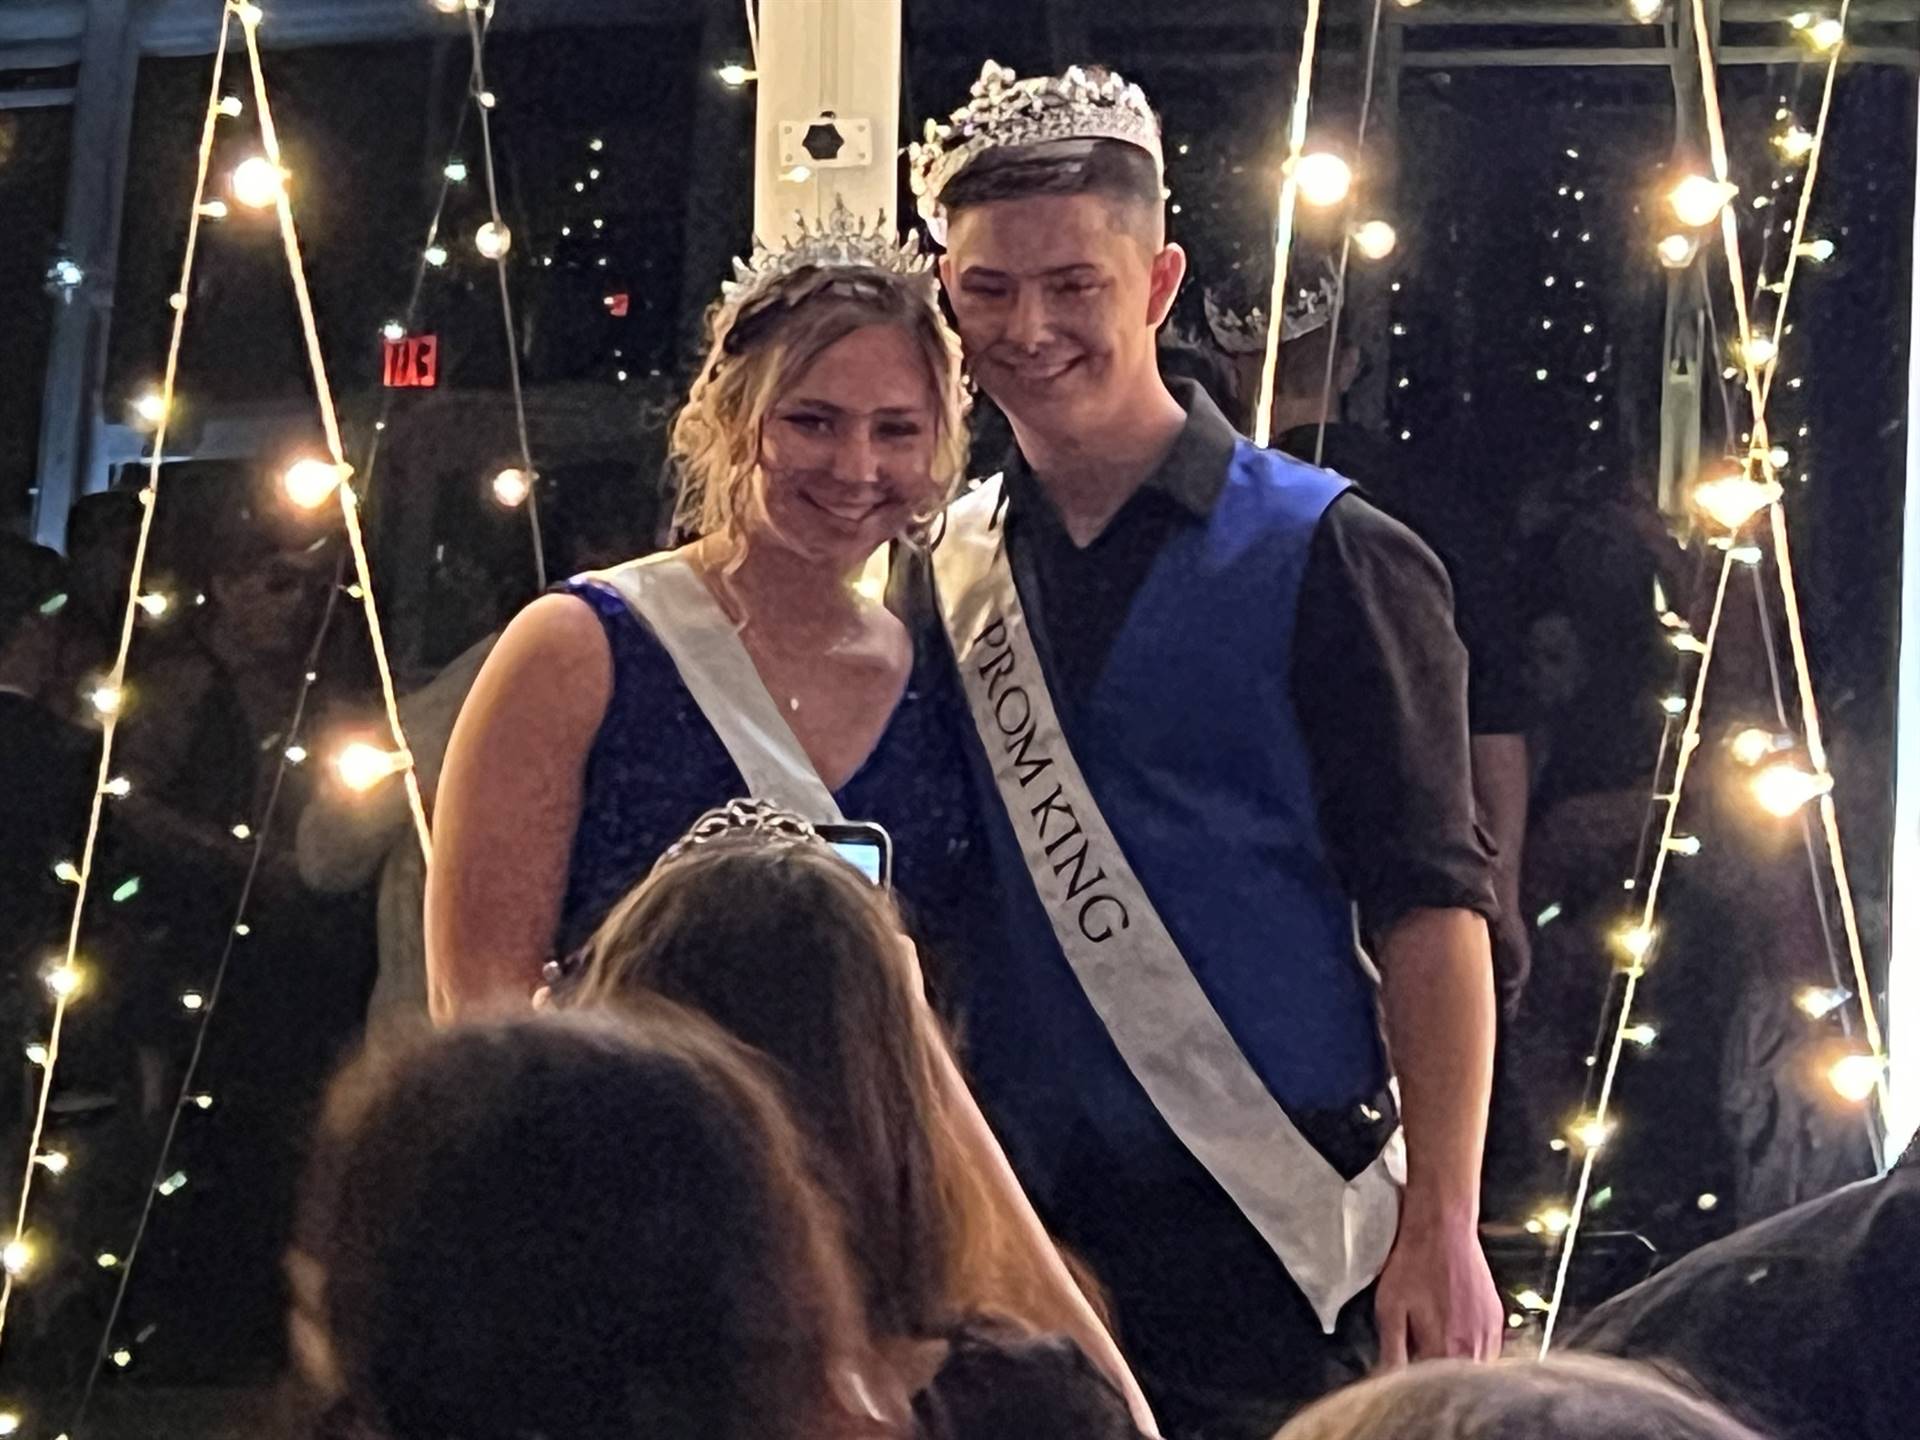 King and Queen / Gabe Lavender and Mackenzie Carroll